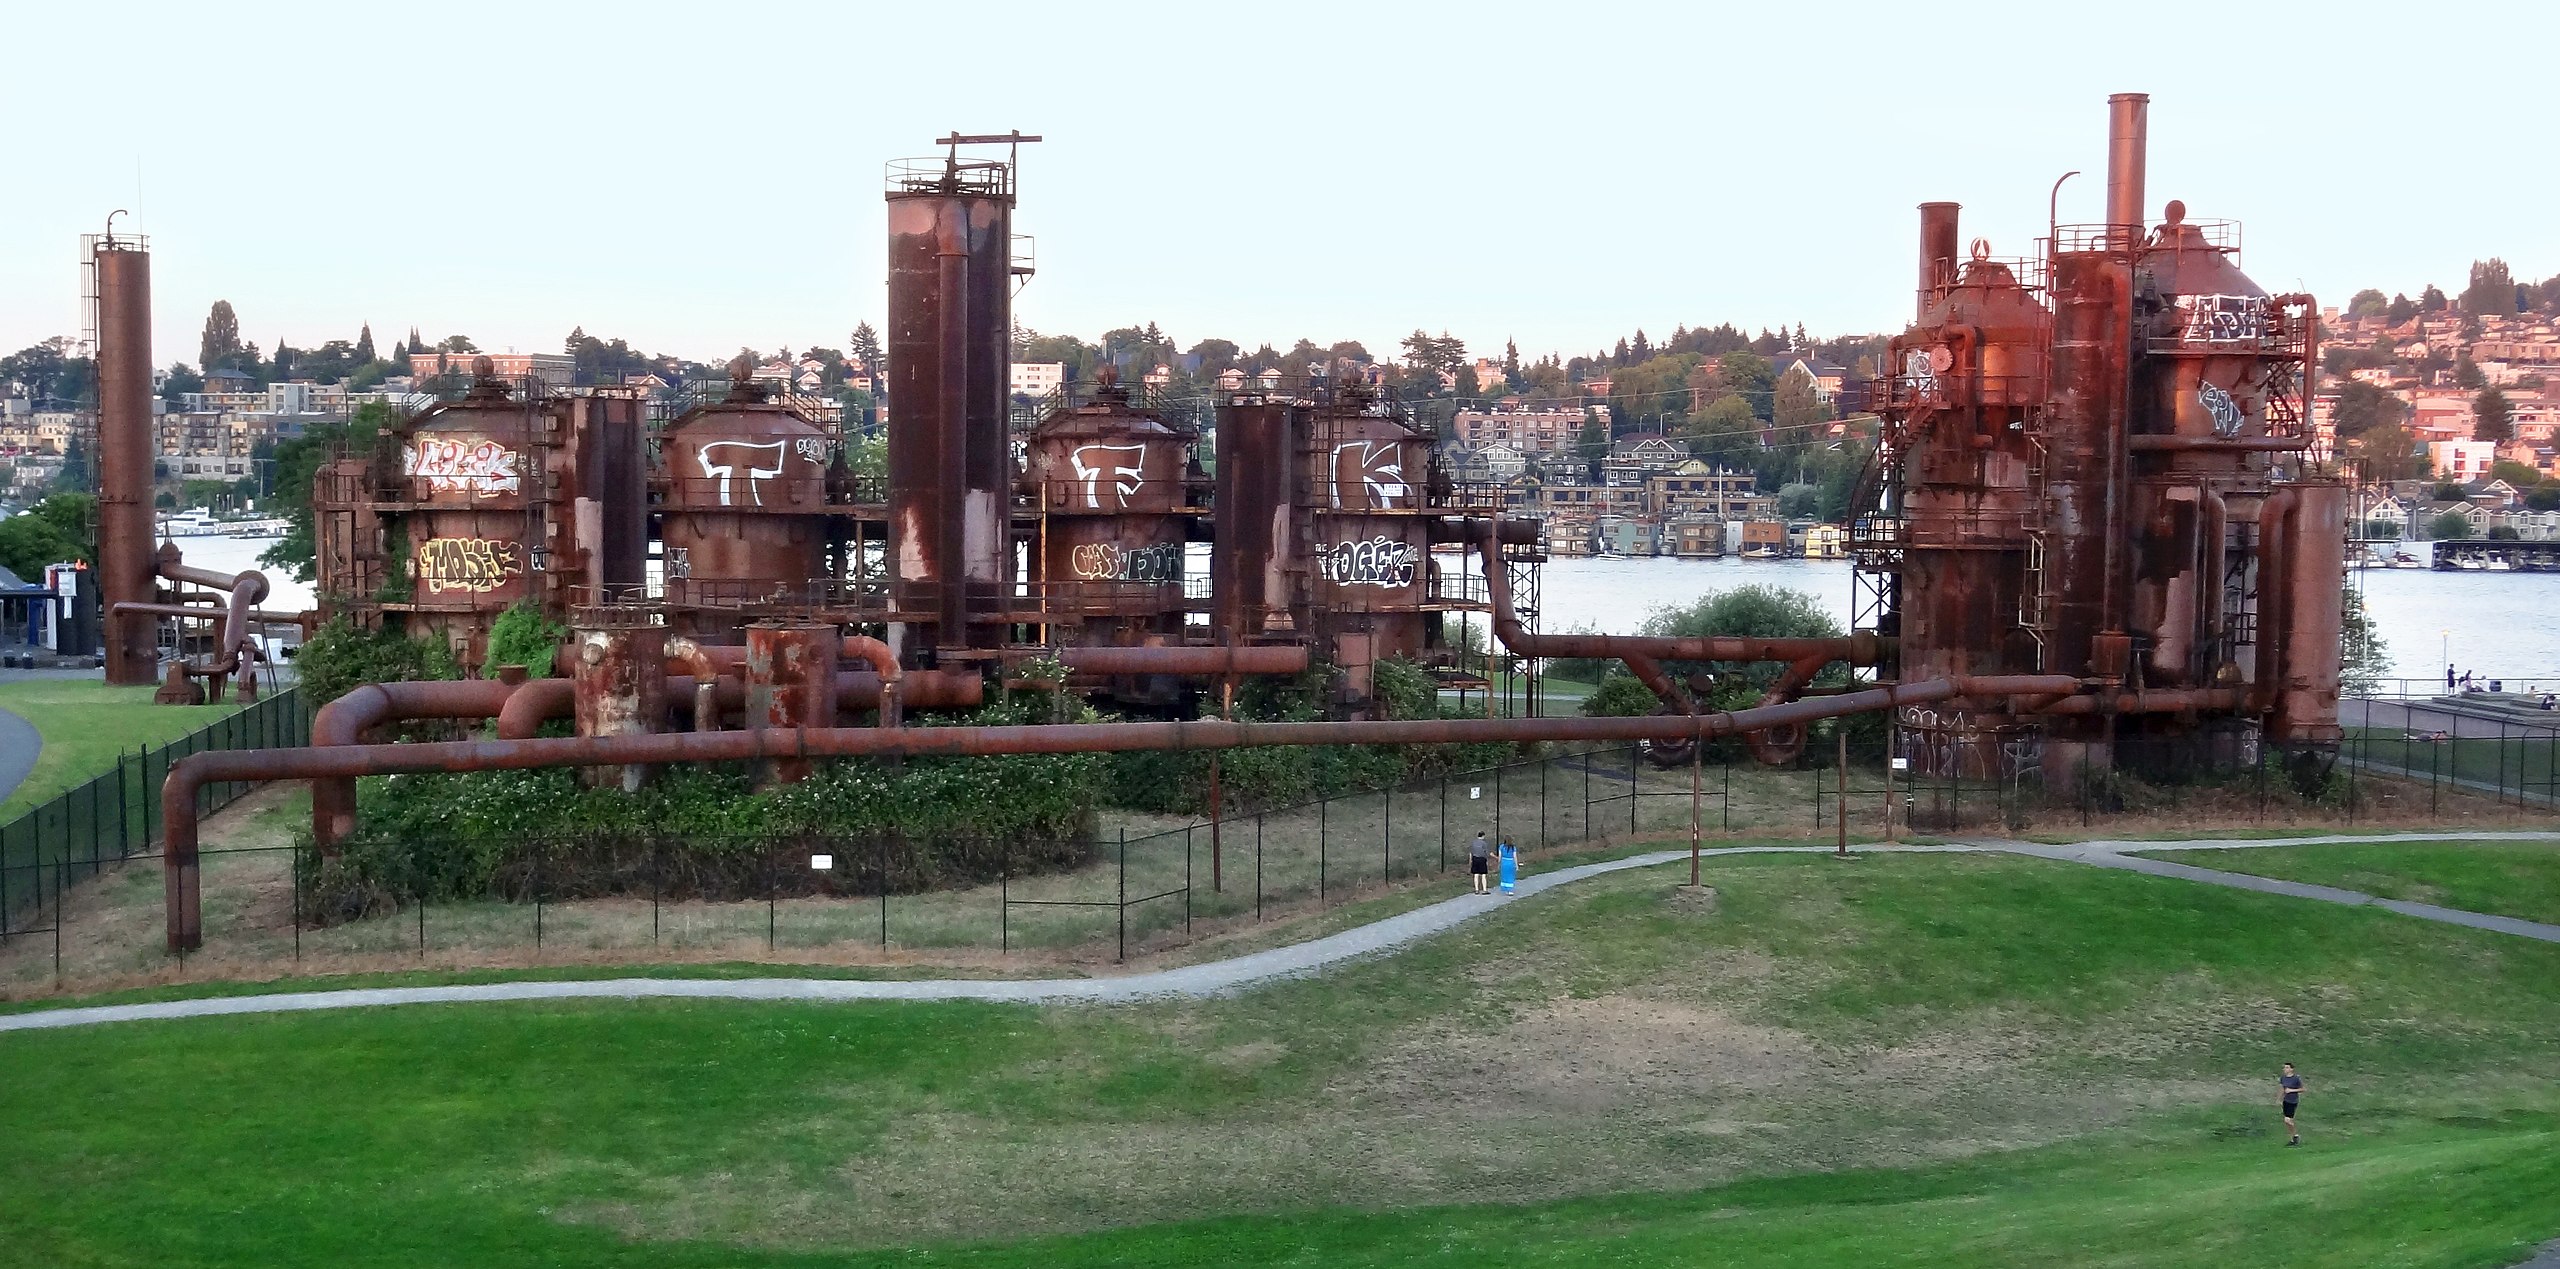 View of gas works park with the Puget Sound in the background.